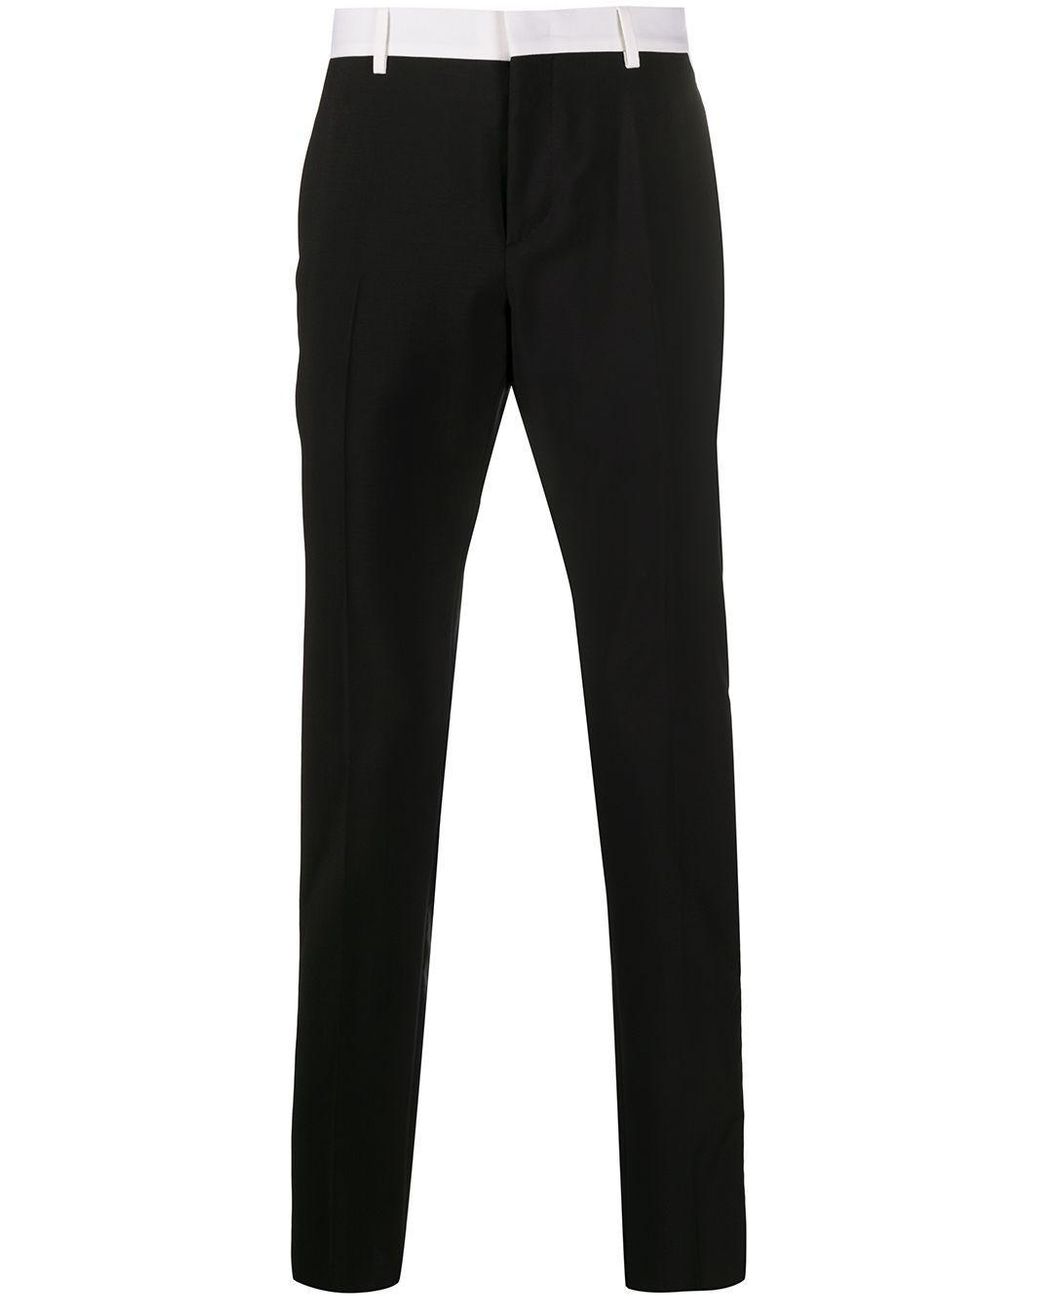 Valentino Wool Pants in Black for Men - Lyst